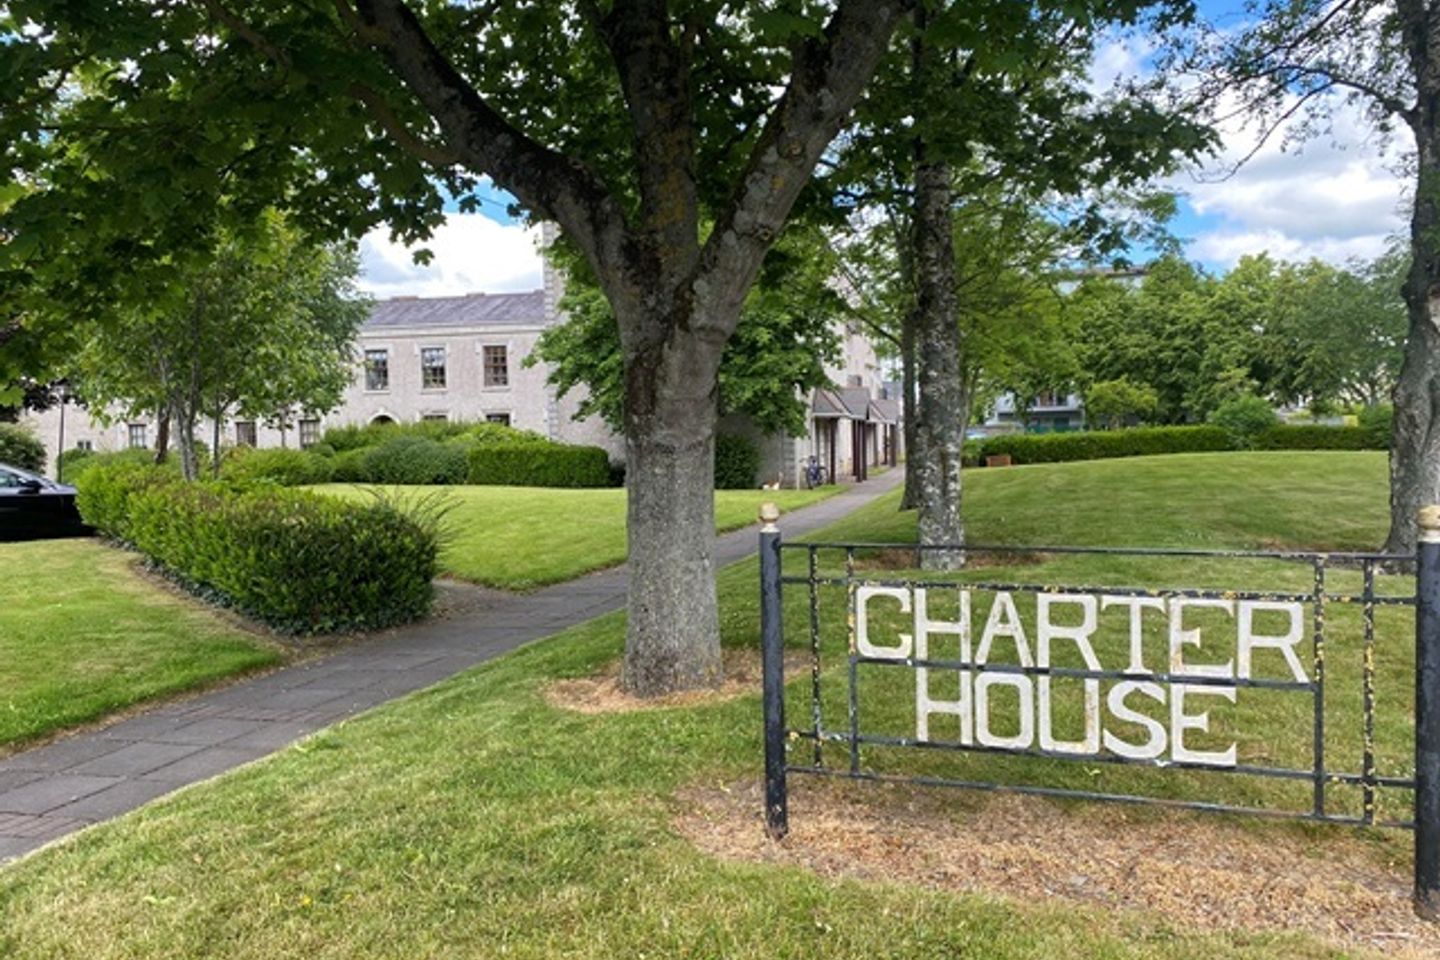 Apartment 12, Charter House, Maynooth, Co. Kildare, W23EF96